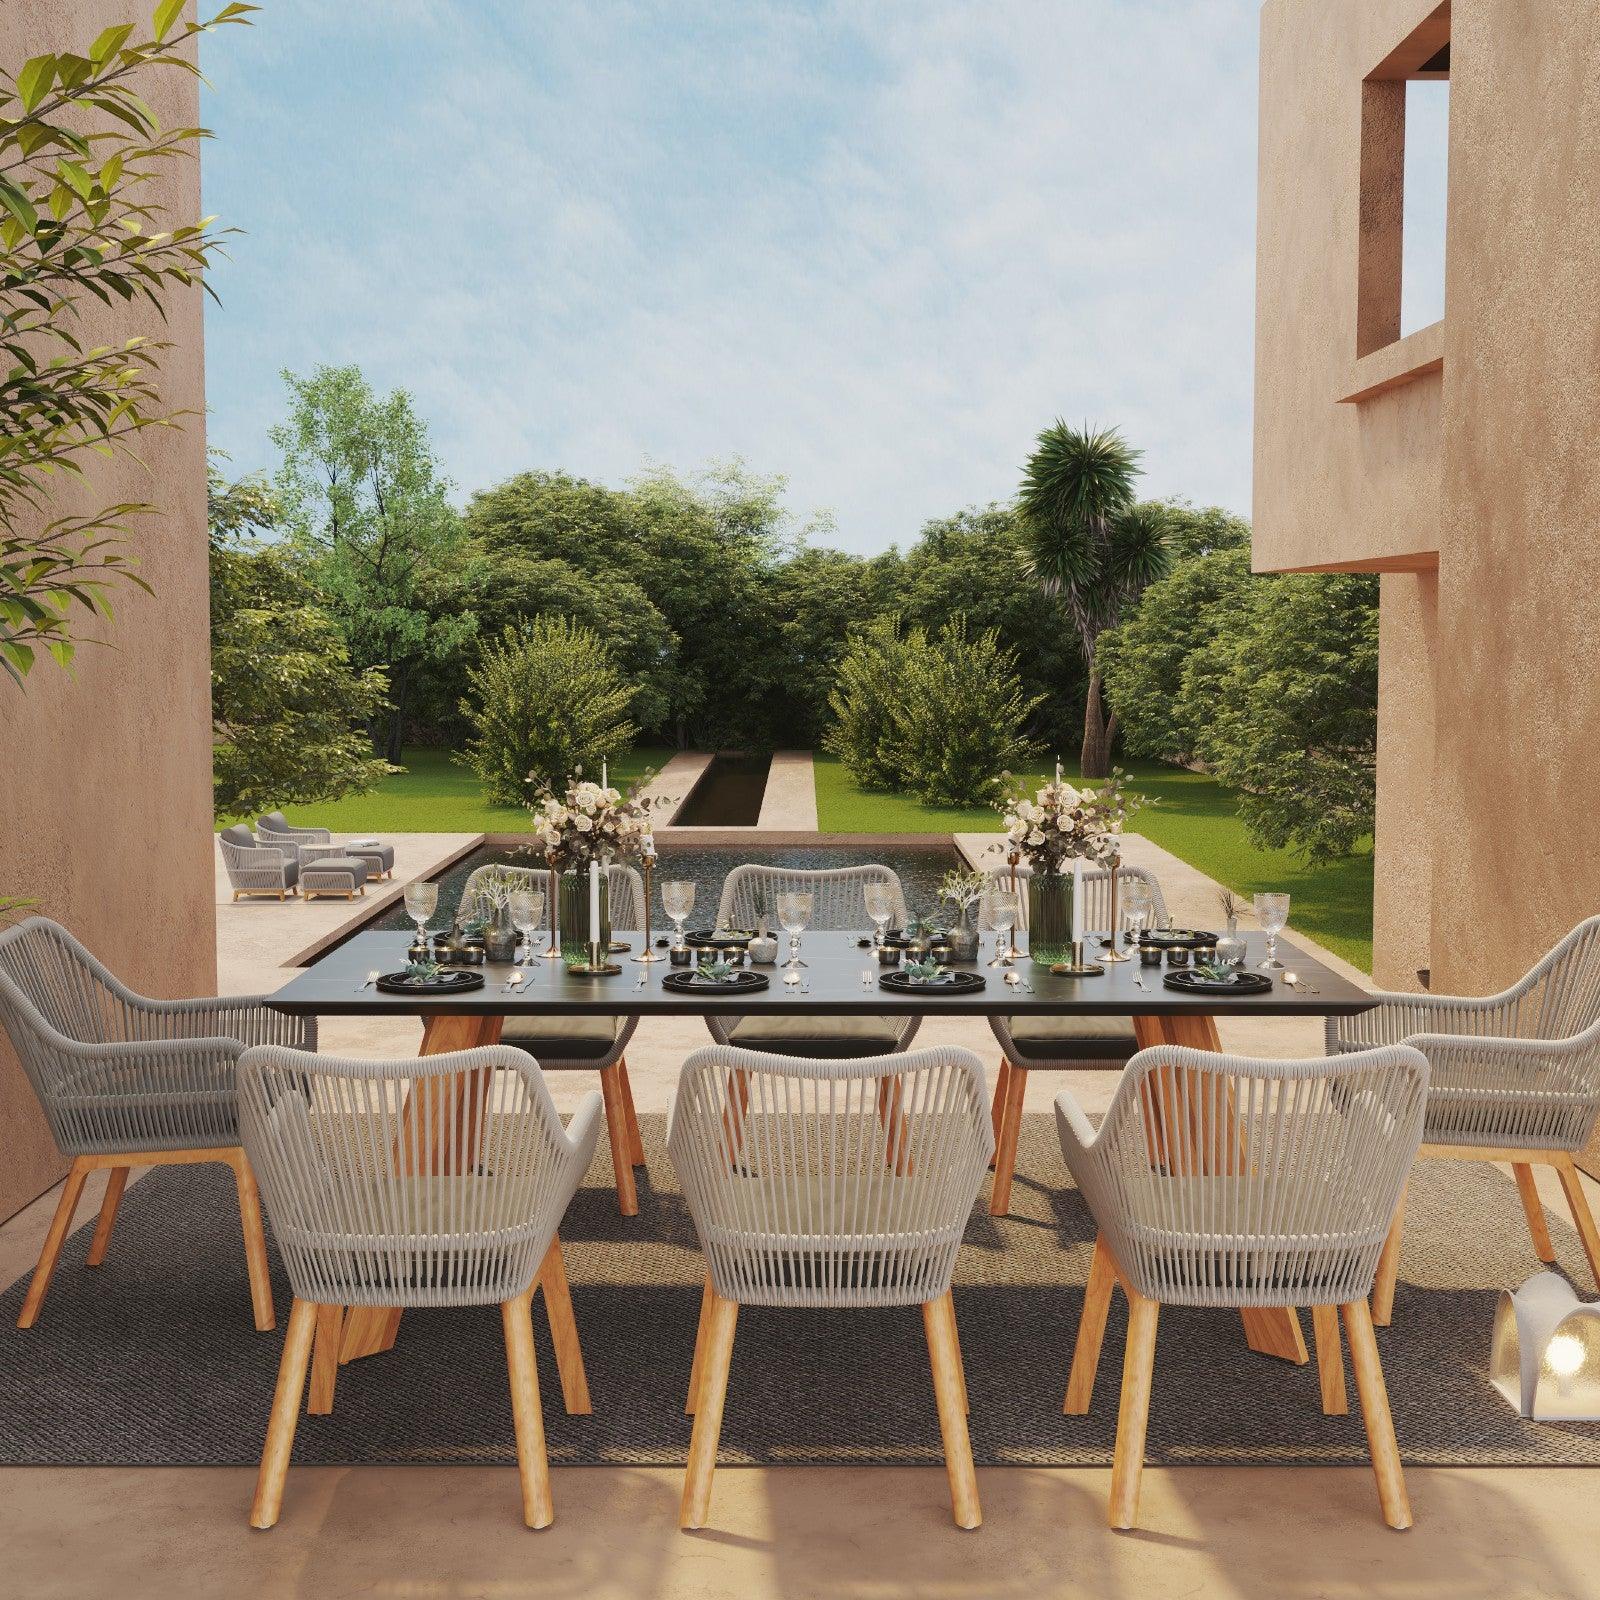 Natural - Dining Set For 8 People, 8 chairs, 1 dining table, teak leg, aluminum frame, grey cushions, sintered stone glasstabletop, classic and European design, in the garden, beside a pool.- Sunsitt Signature